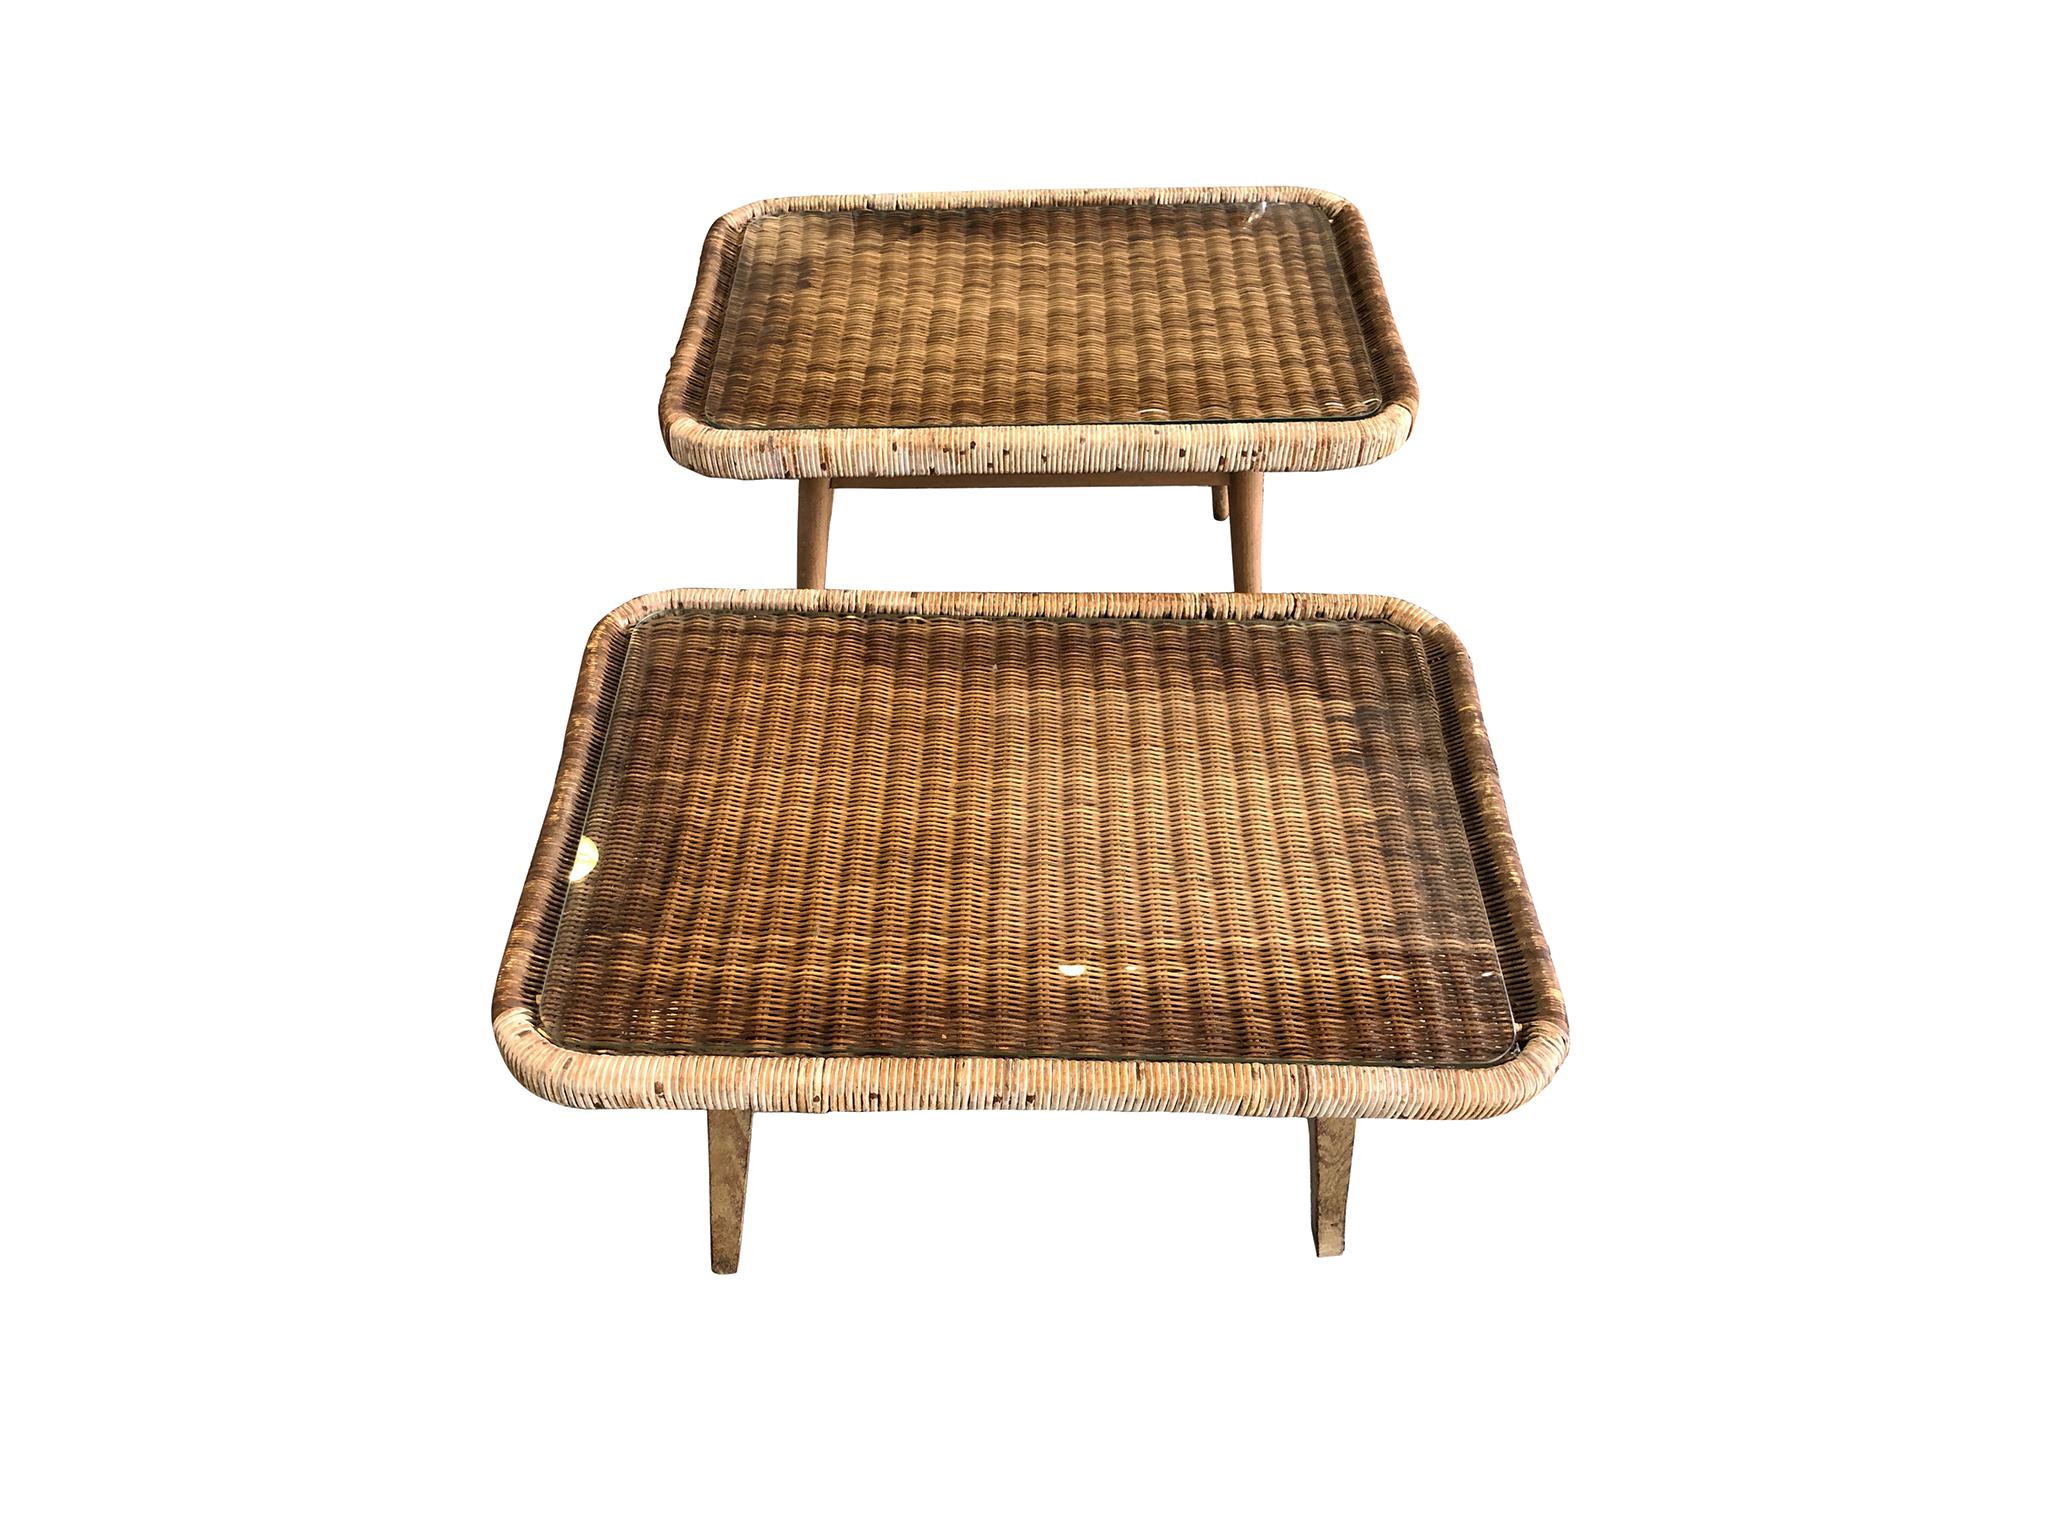 Two midcentury low end-tables handcrafted from rattan and beech, and with a glass insert. This near-pair is attributed to the Japanese modernist designer Isamu Kenmochi. The tables were made by Yamakawa in Tokyo in the 1950s. We love these tables